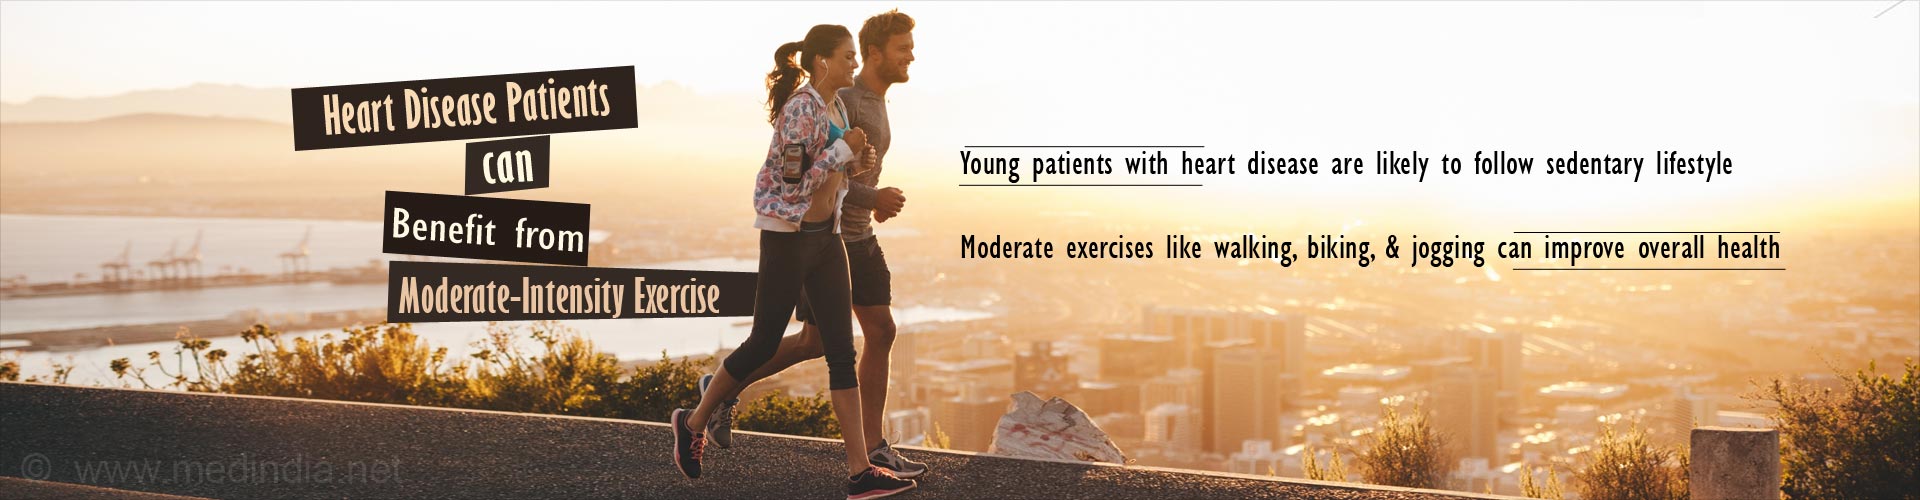 heart disease patients can benefit from moderate-intensity exercise
- young patients with heart disease are likely to follow sedentary lifestyle
- moderate exercises like walking, biking & jogging can improve overall health